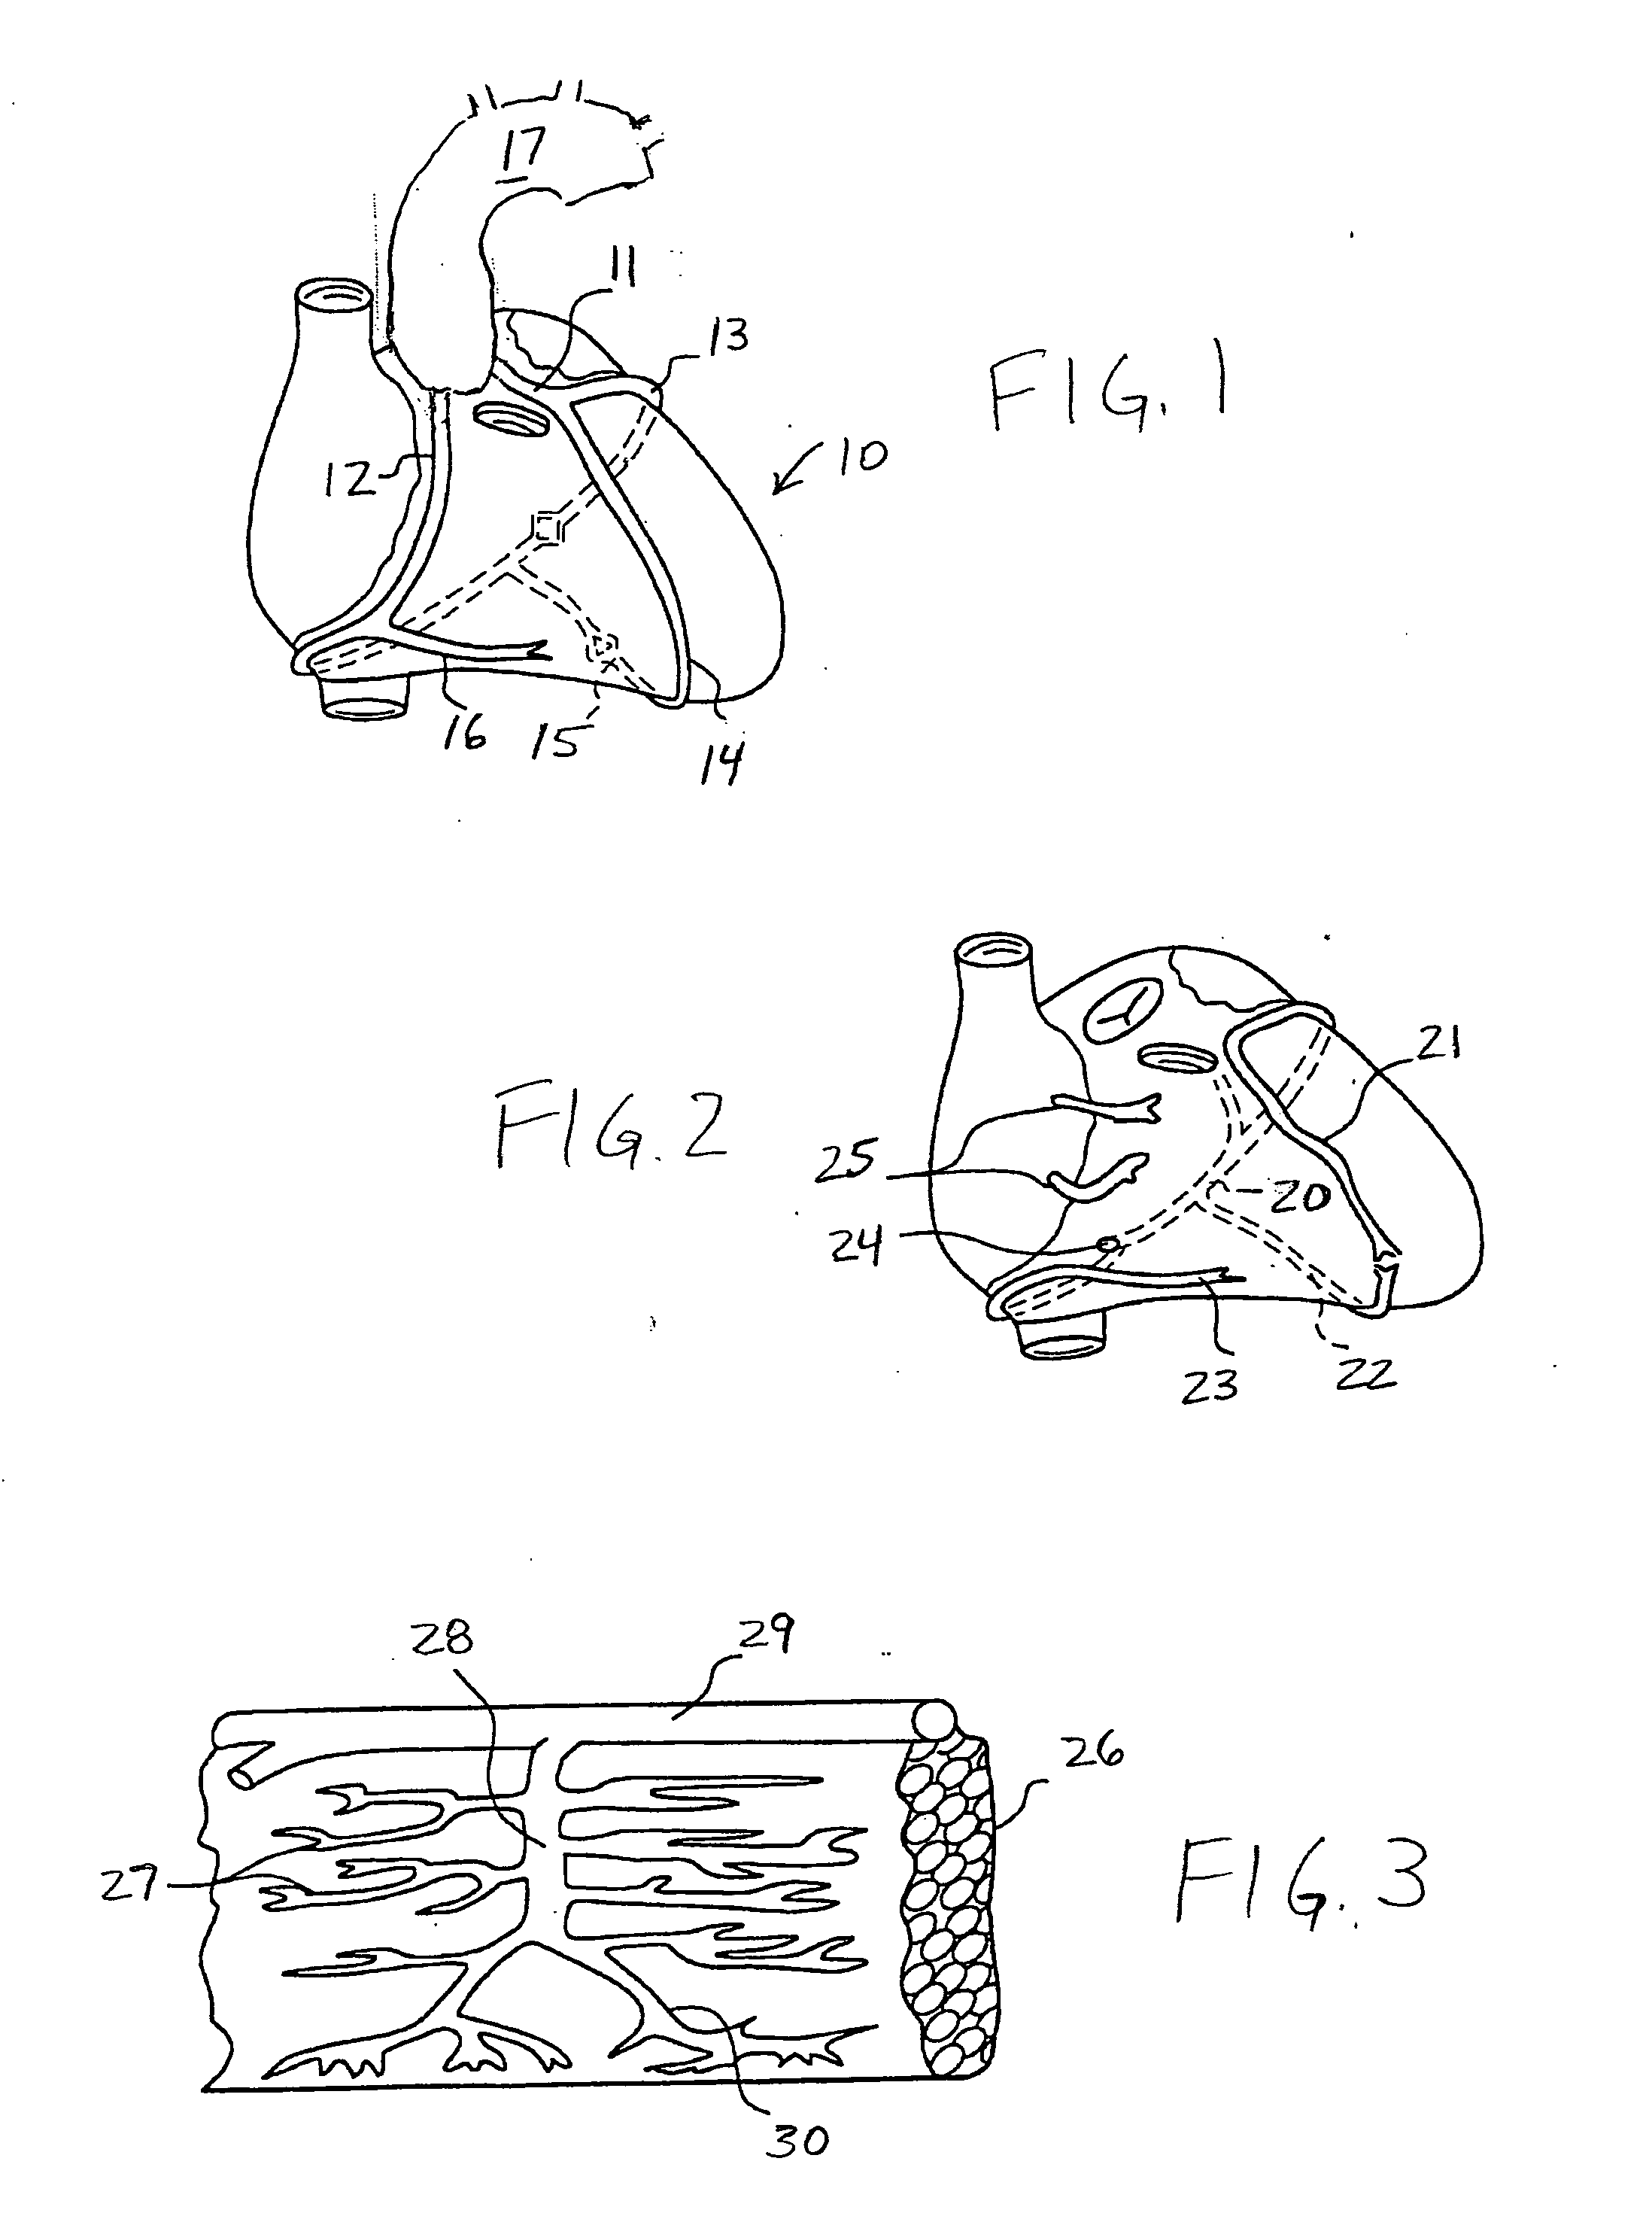 Methods and apparatus for treating infarcted regions of tissue following acute myocardial infarction